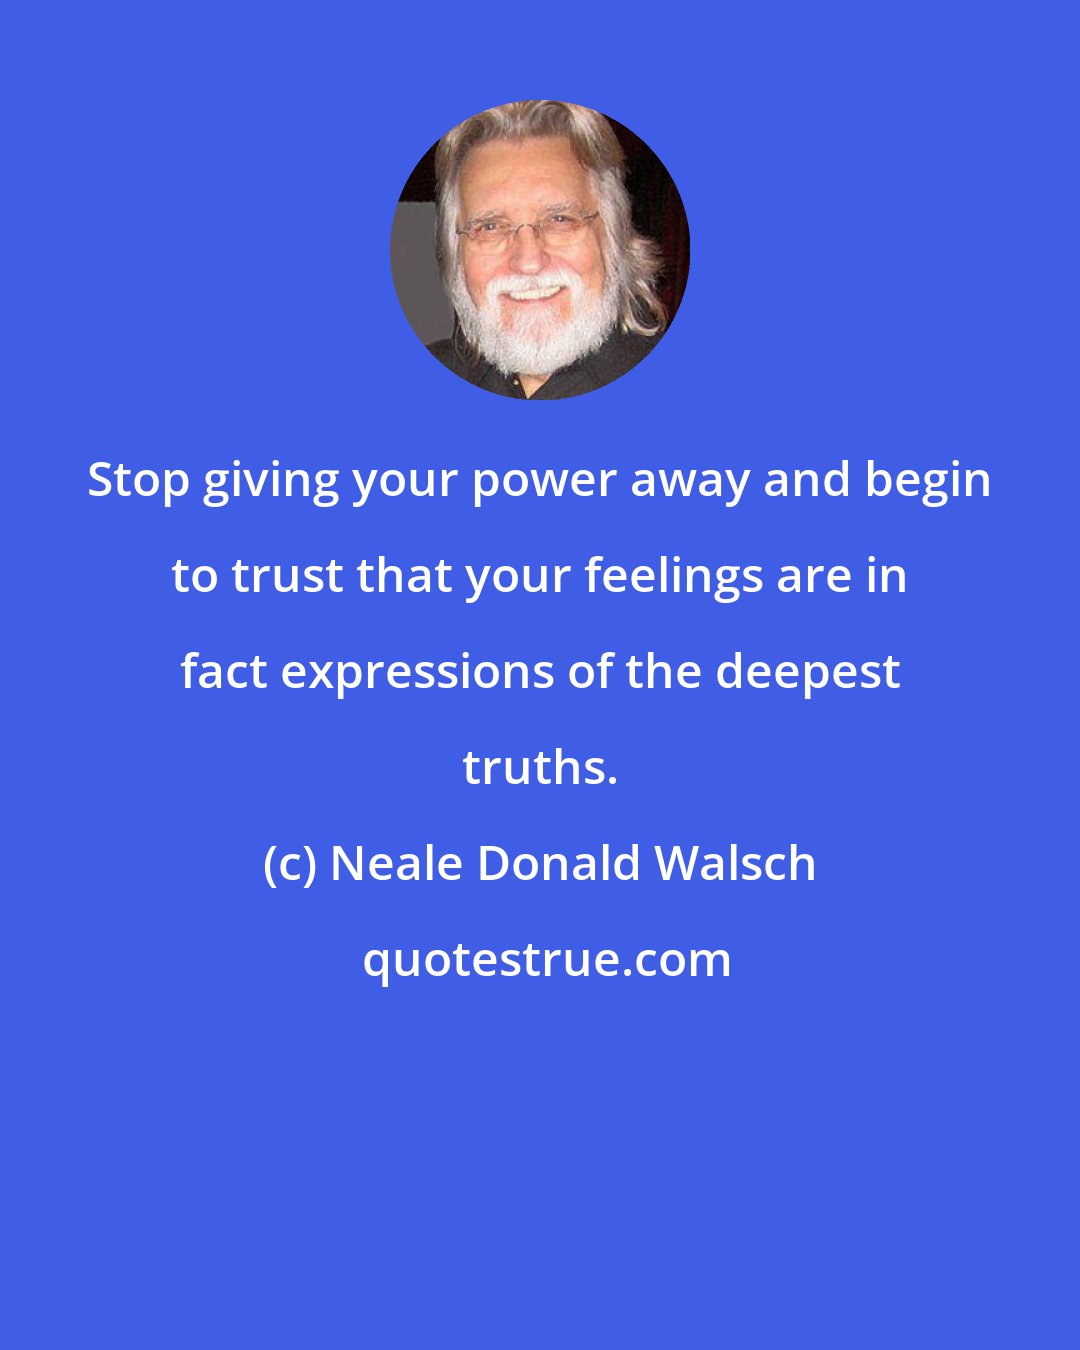 Neale Donald Walsch: Stop giving your power away and begin to trust that your feelings are in fact expressions of the deepest truths.